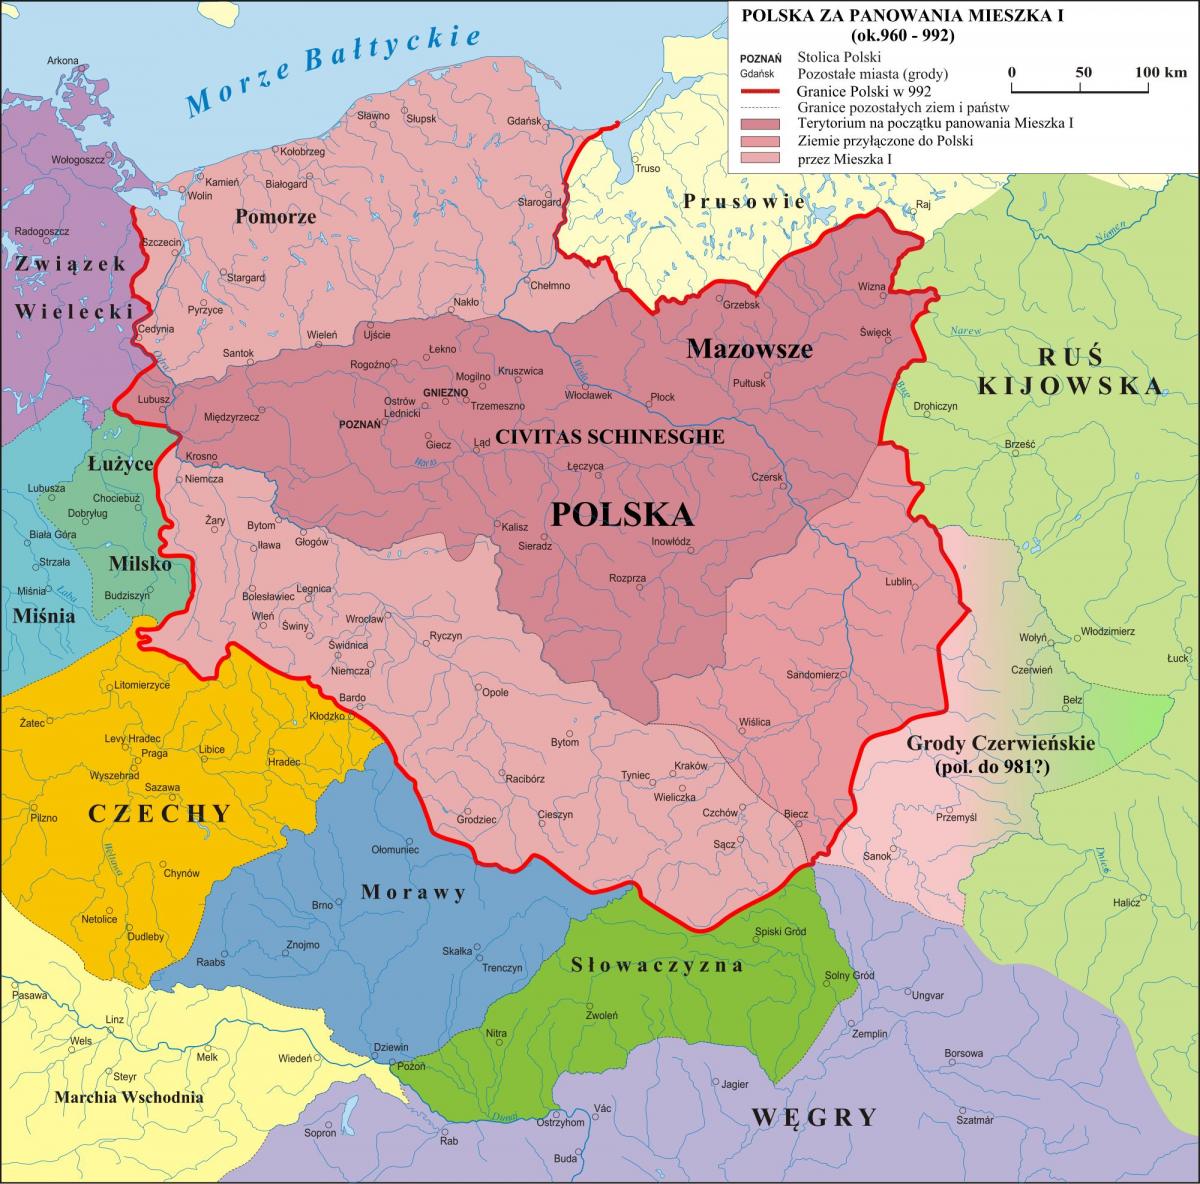 Historical map of Poland